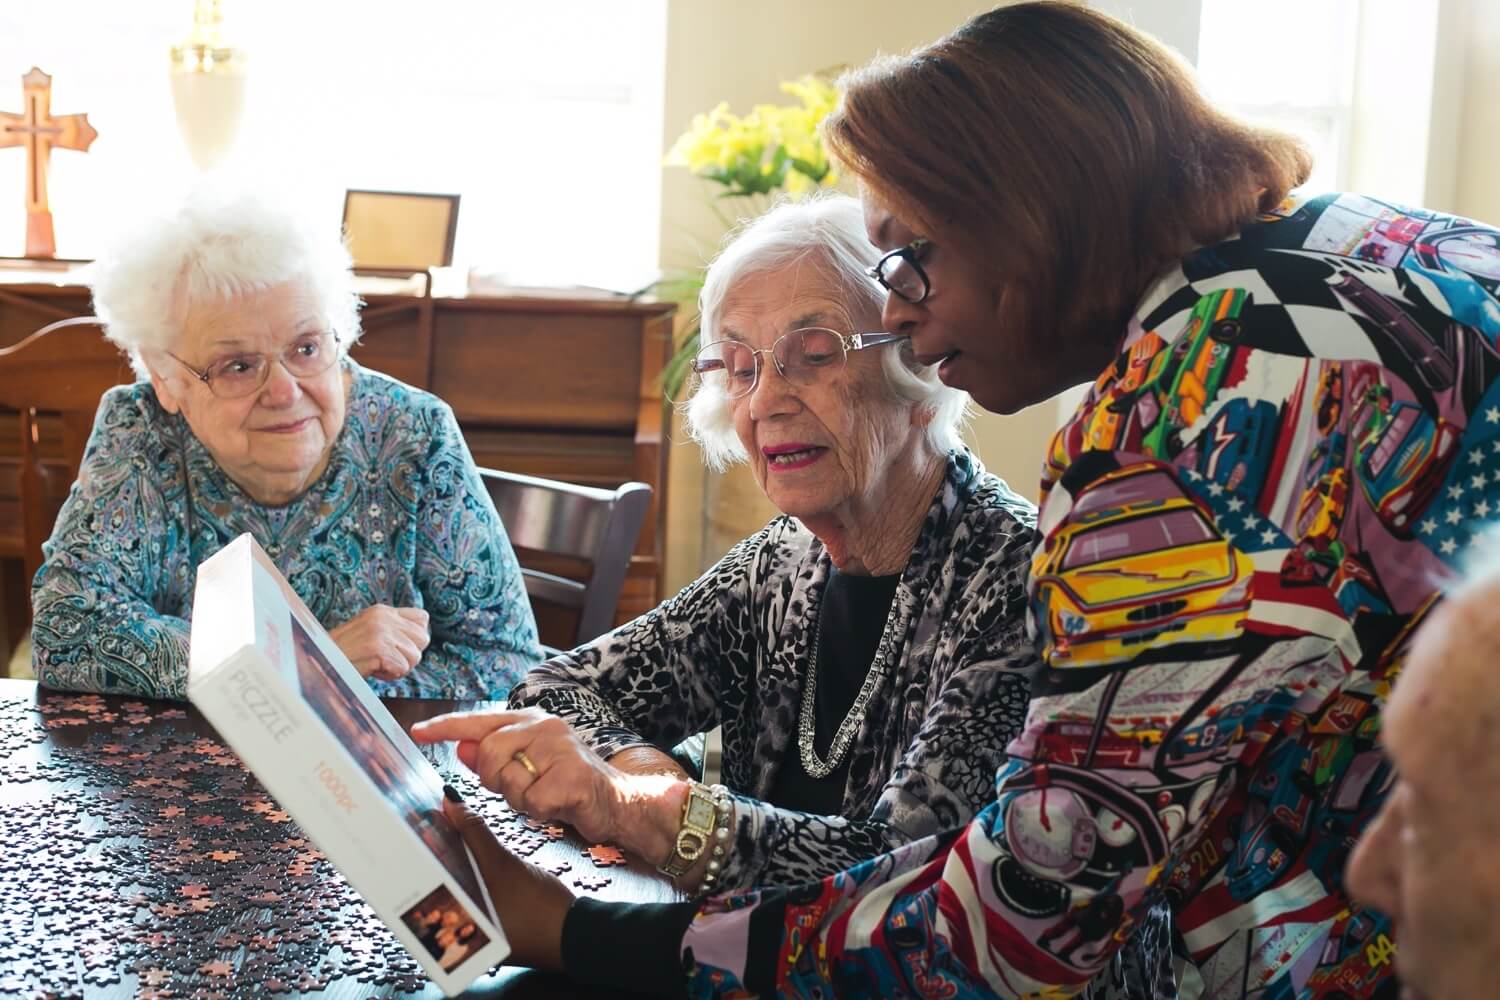 A staff member helping two senior residents with a jigsaw puzzle